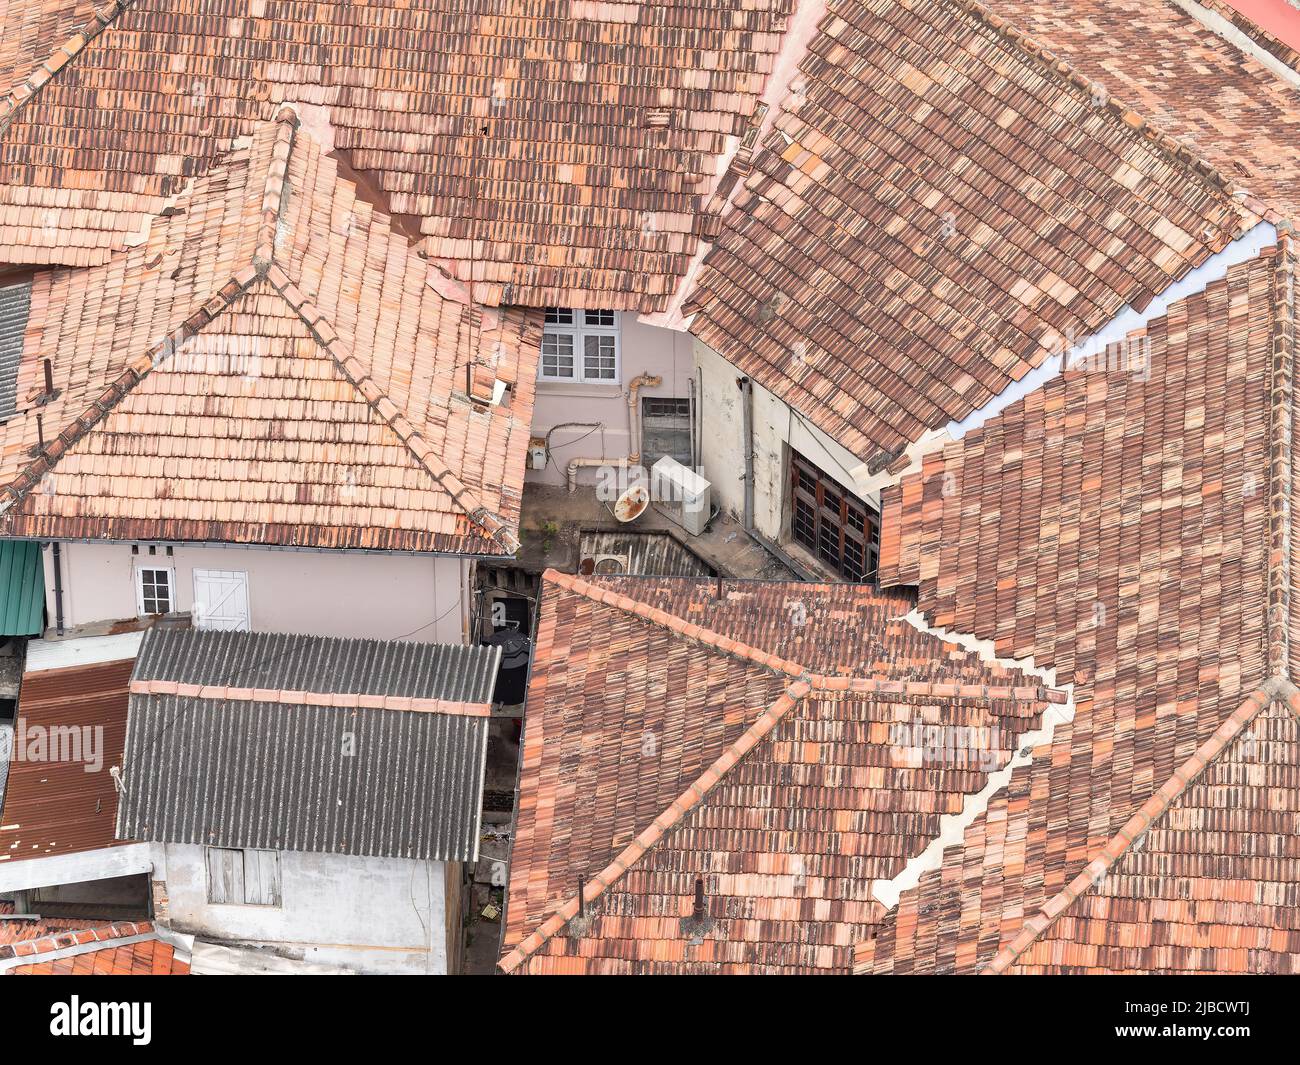 Aerial view of tiled rooftops in Colombo, the capital city of Sri Lanka Stock Photo